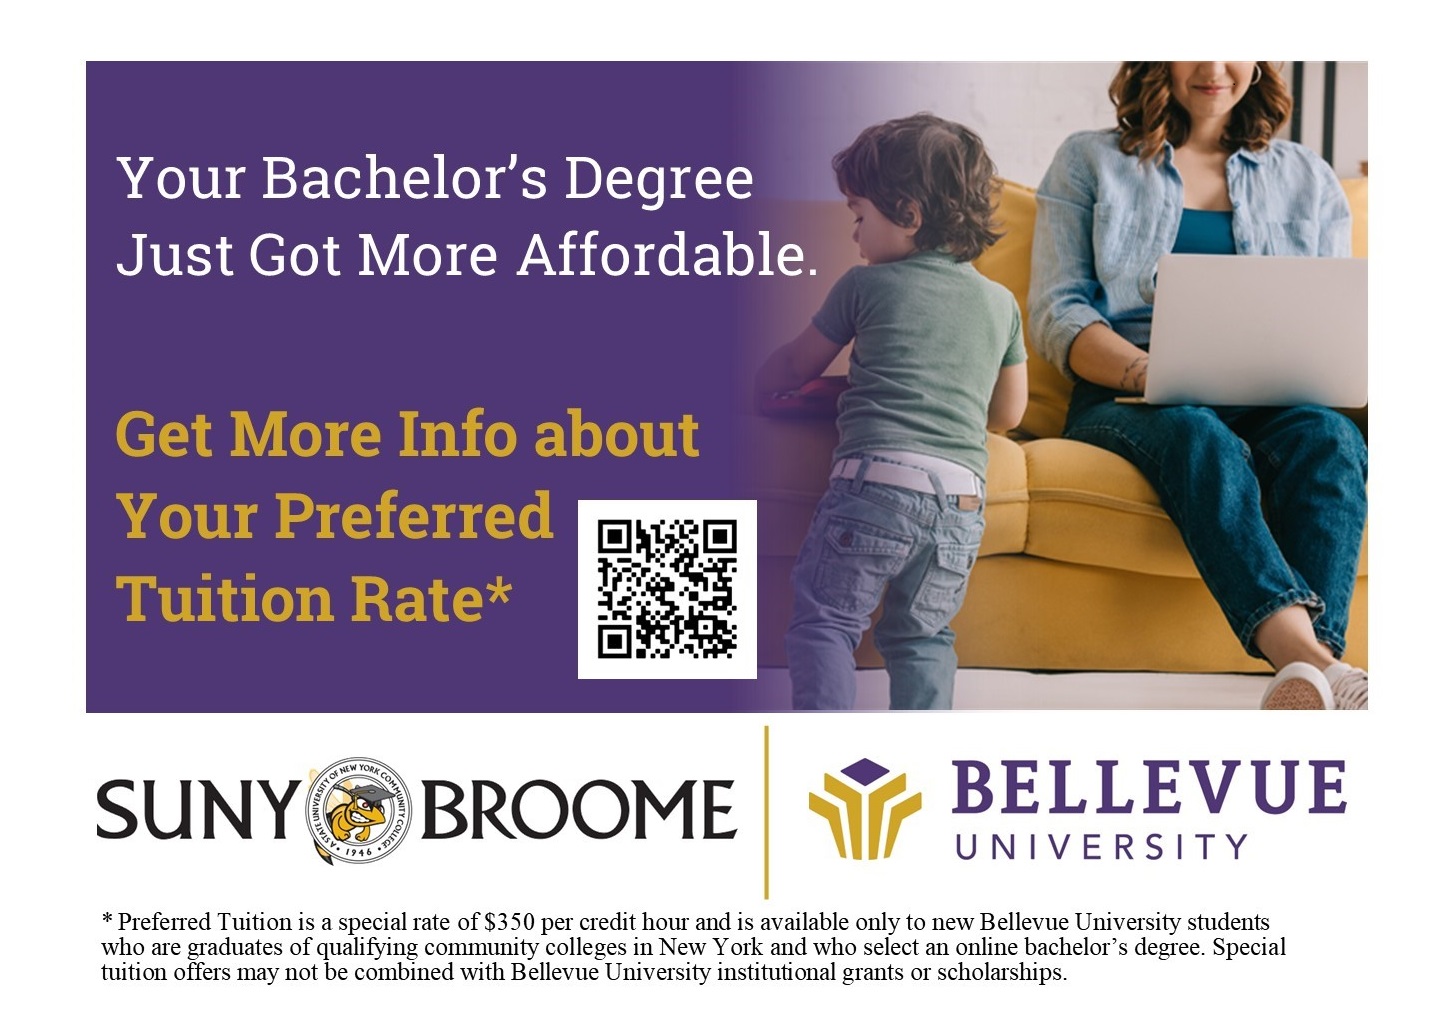 Your Bachelor's Degree just got more affordable. Scan the QR code for more information.